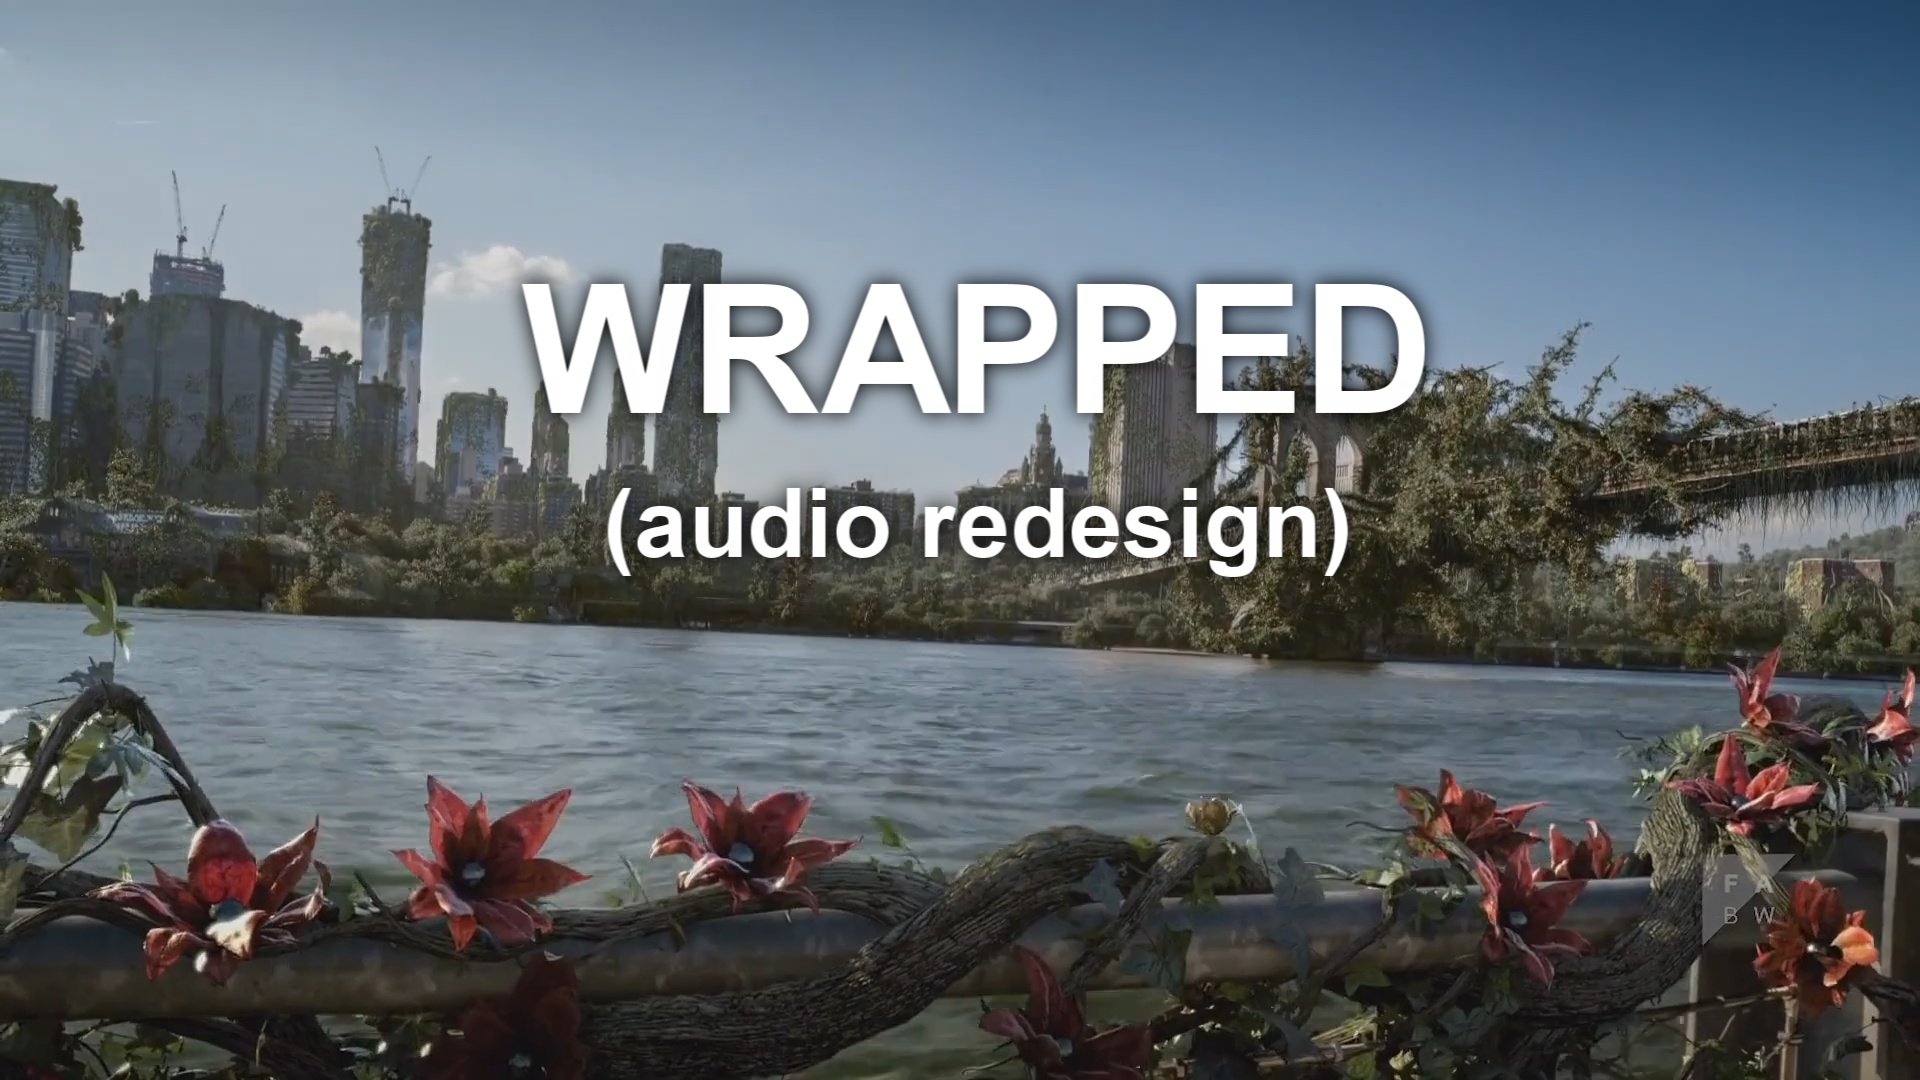 Wrapped (audio redesign)